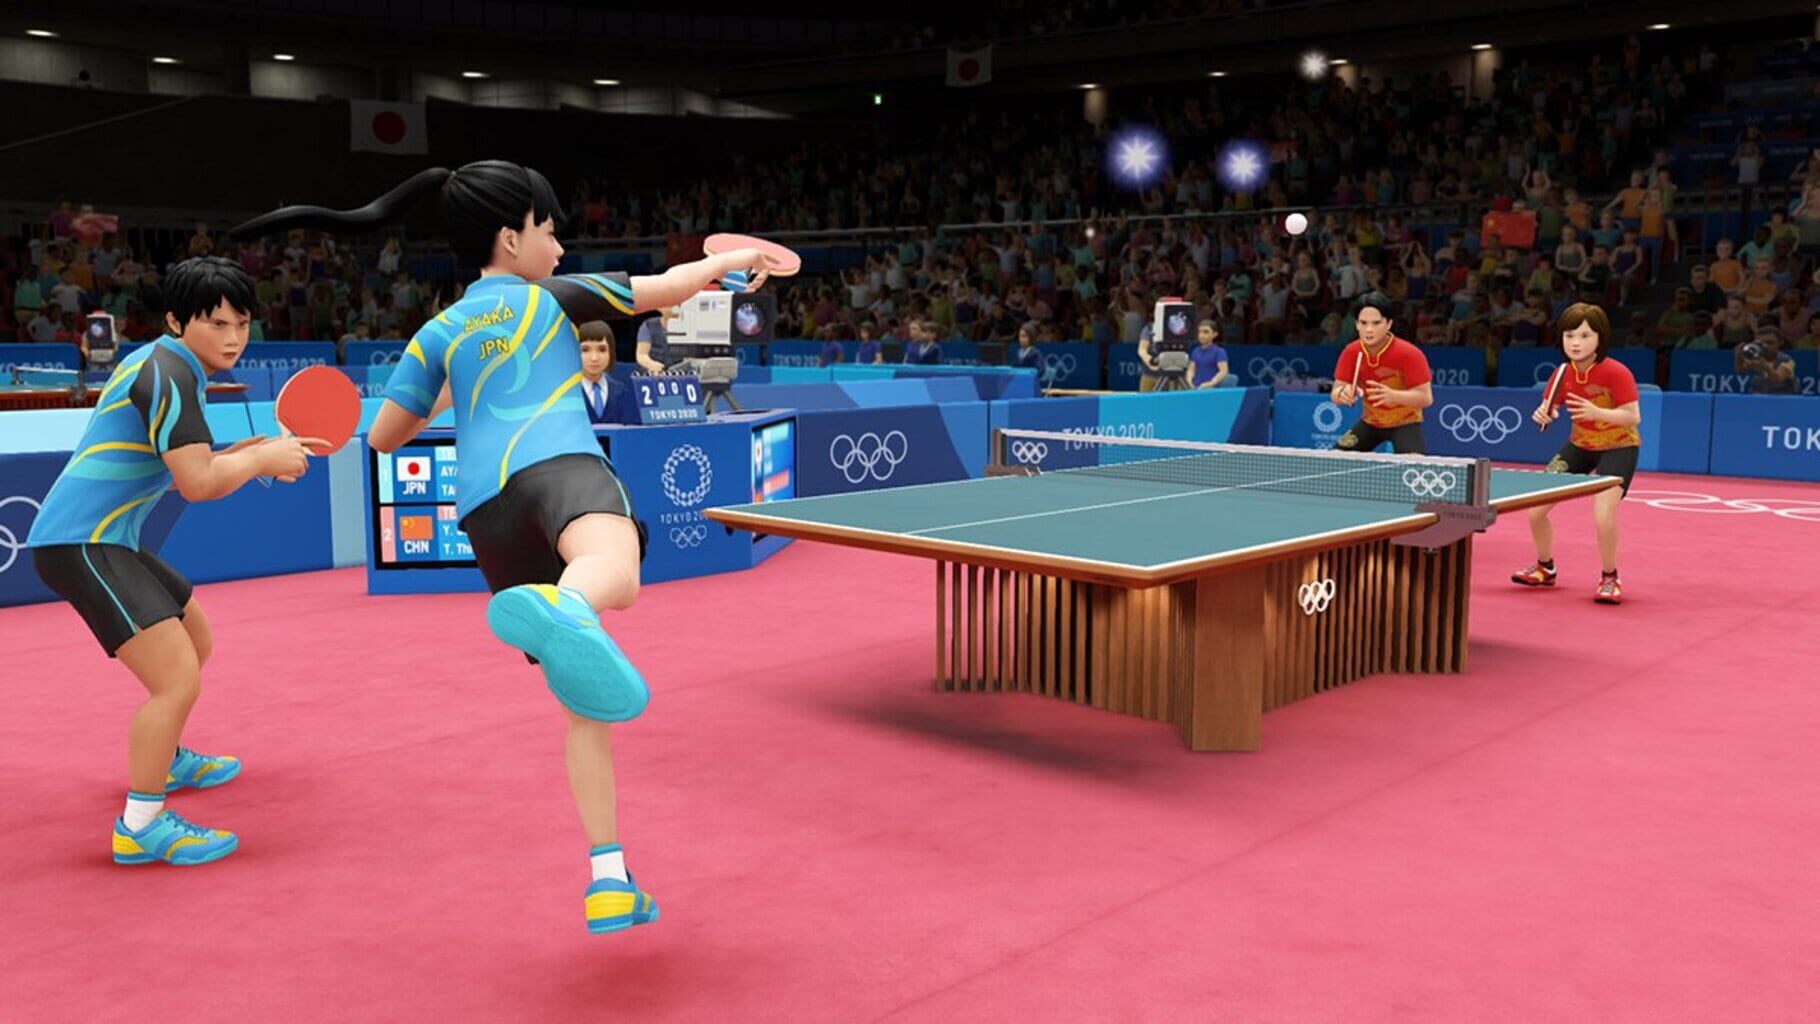 Olympic Games Tokyo 2020: The Official Video Game screenshots